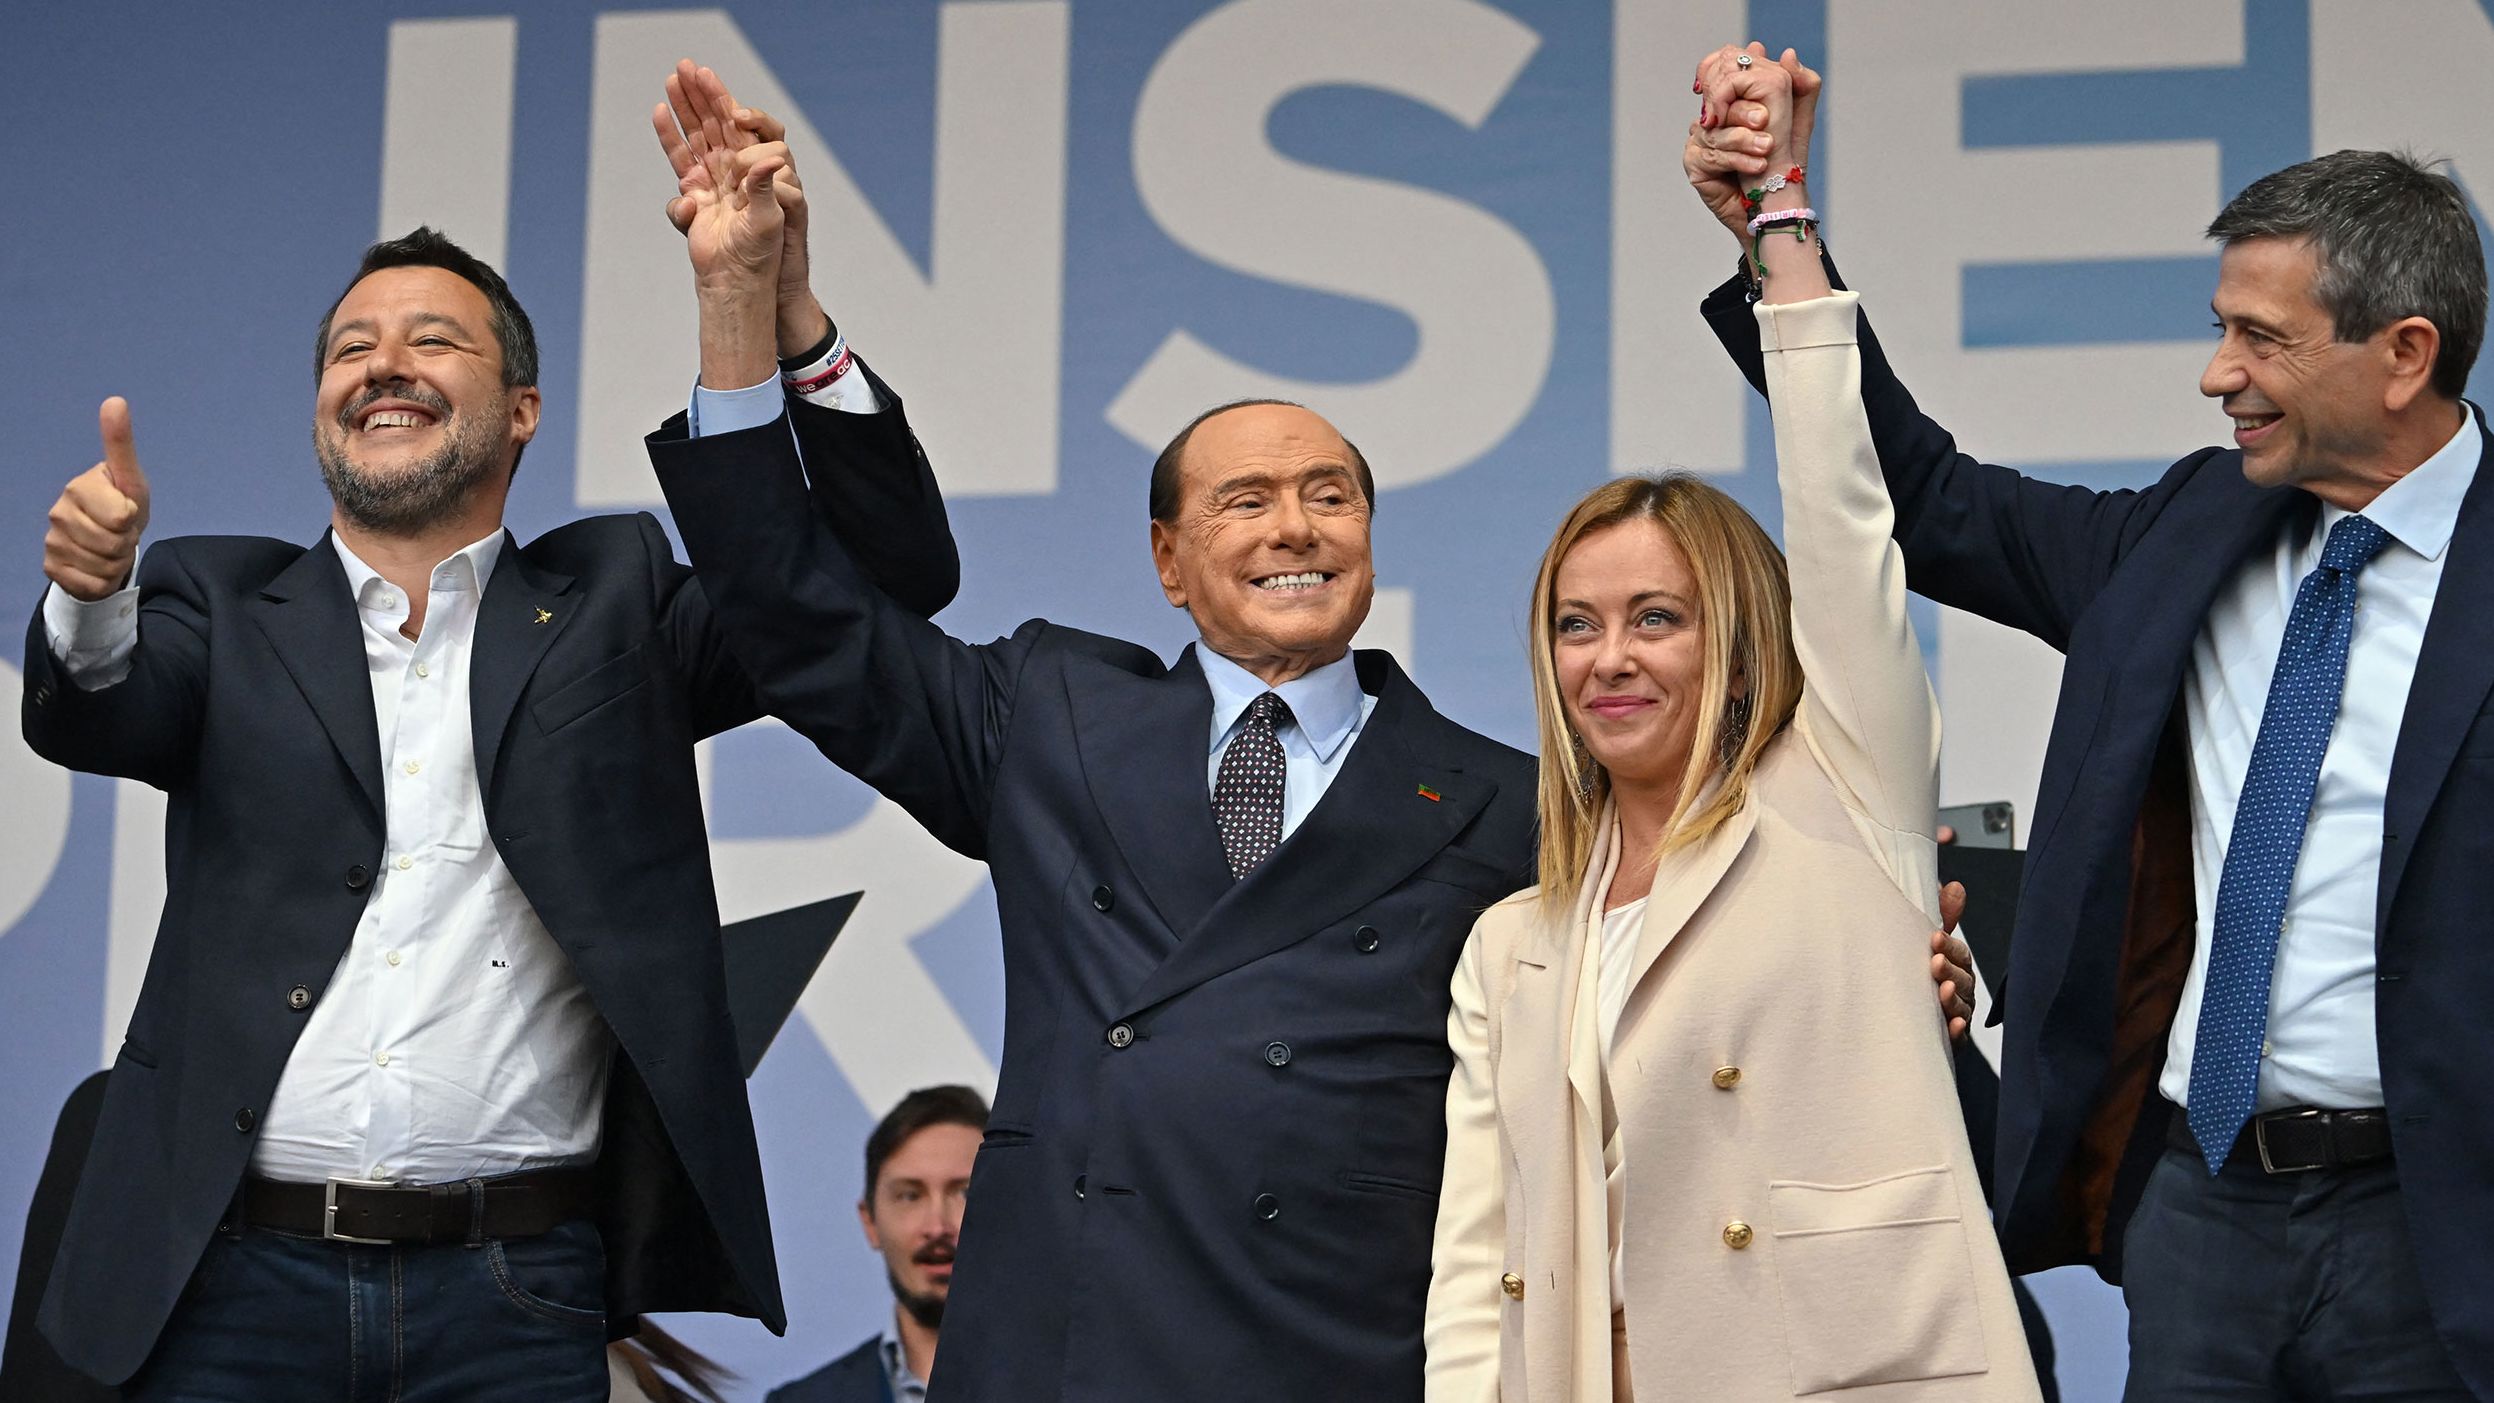 From left, Italian political leaders Matteo Salvini, Silvio Berlusconi, Giorgia Meloni and Maurizio Lupi stand on stage Thursday, September 22, during a rally of the country's coalition of right-wing political parties. Meloni later claimed victory in a general election <a href="https://www.cnn.com/2022/09/25/europe/italy-election-results-intl/index.html" target="_blank">set to install her as Italy's first female prime minister.</a>